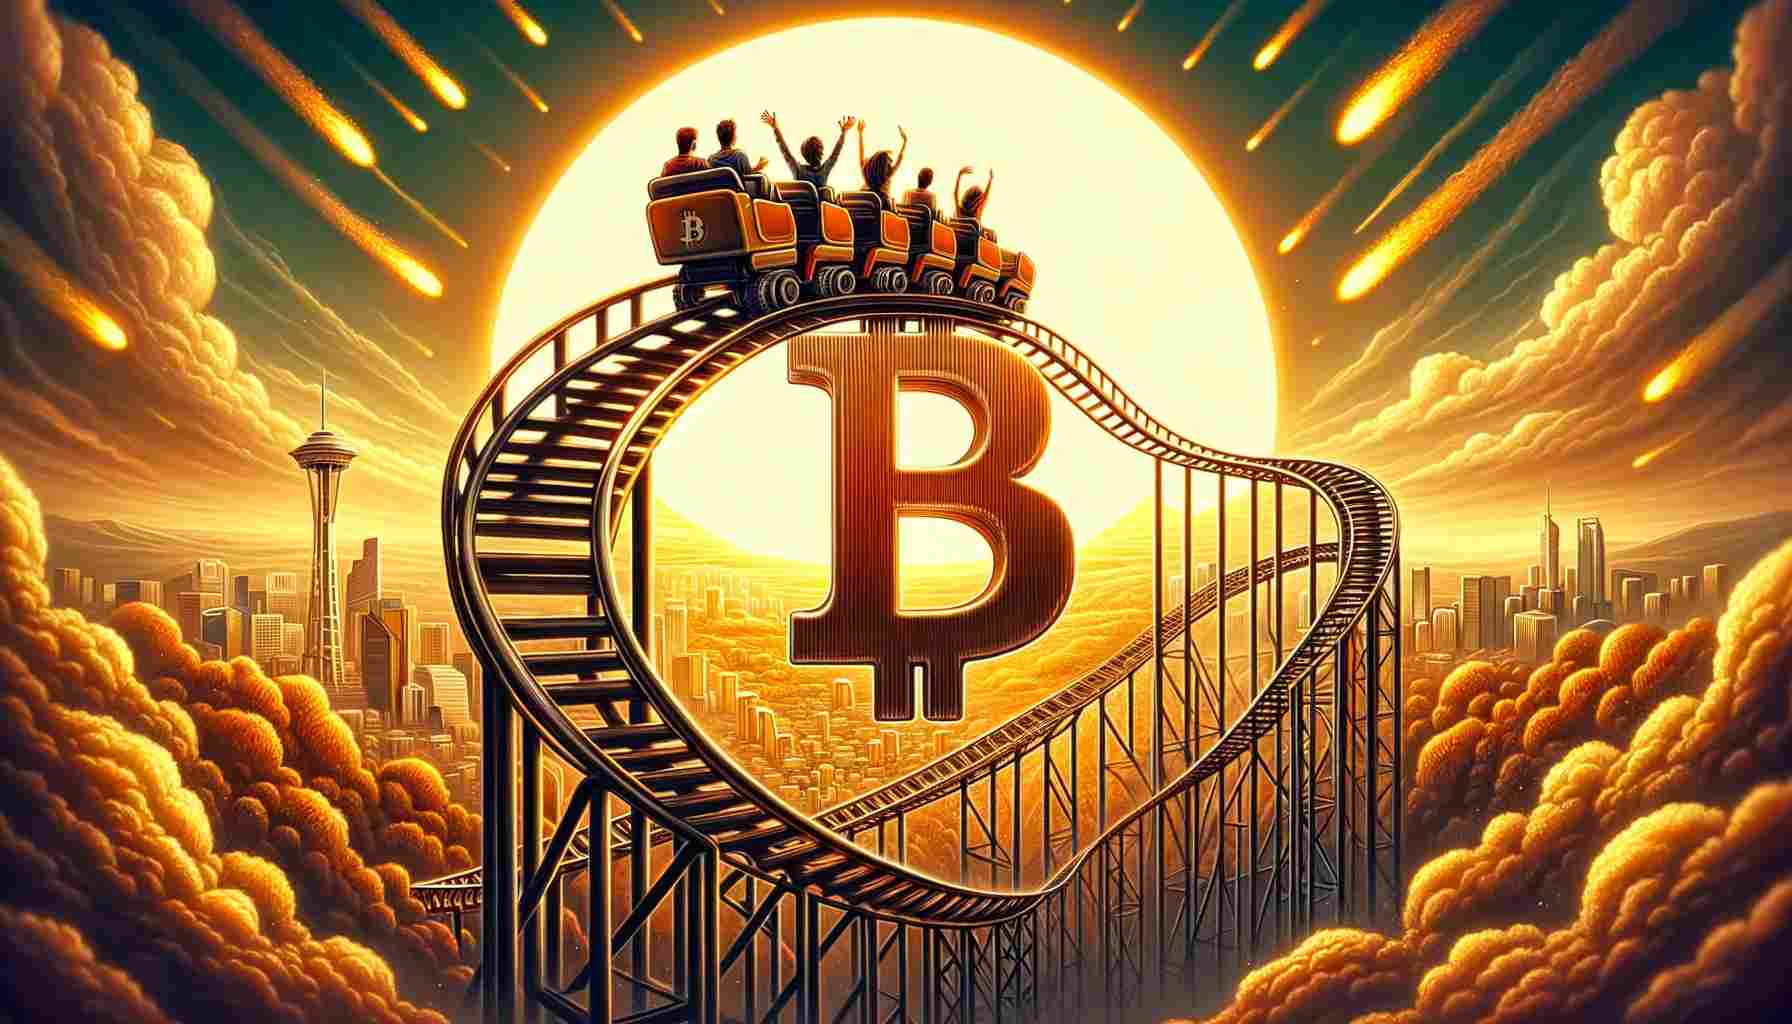 Bitcoin climbs to ATH and then corrects sharply